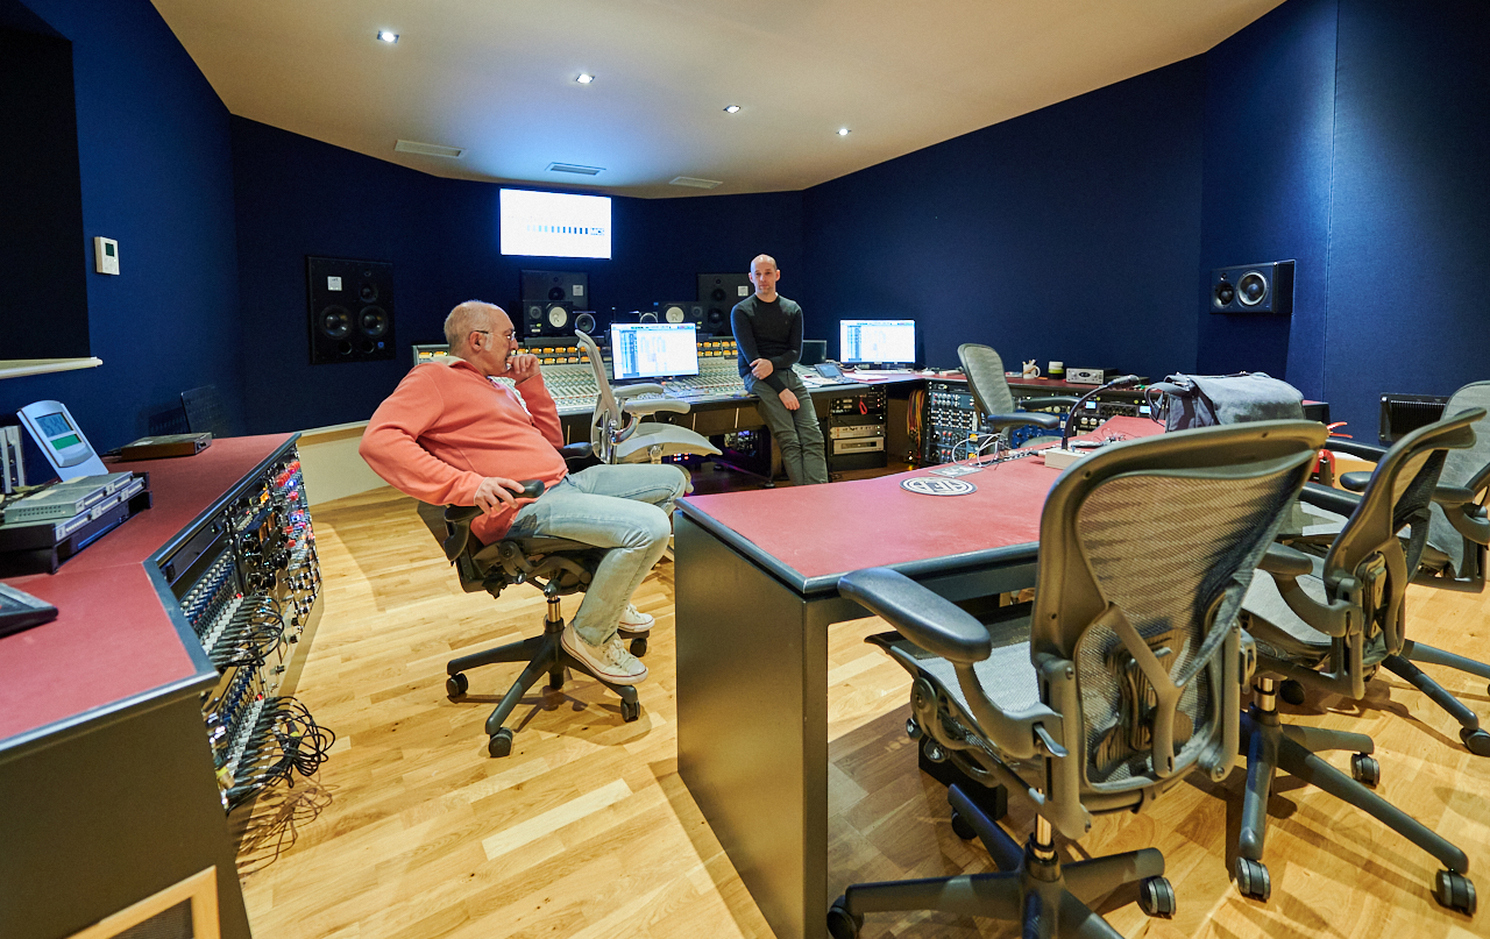 Studio owner Michele Catri seated (L) with engineer Ronan Phelan (R)